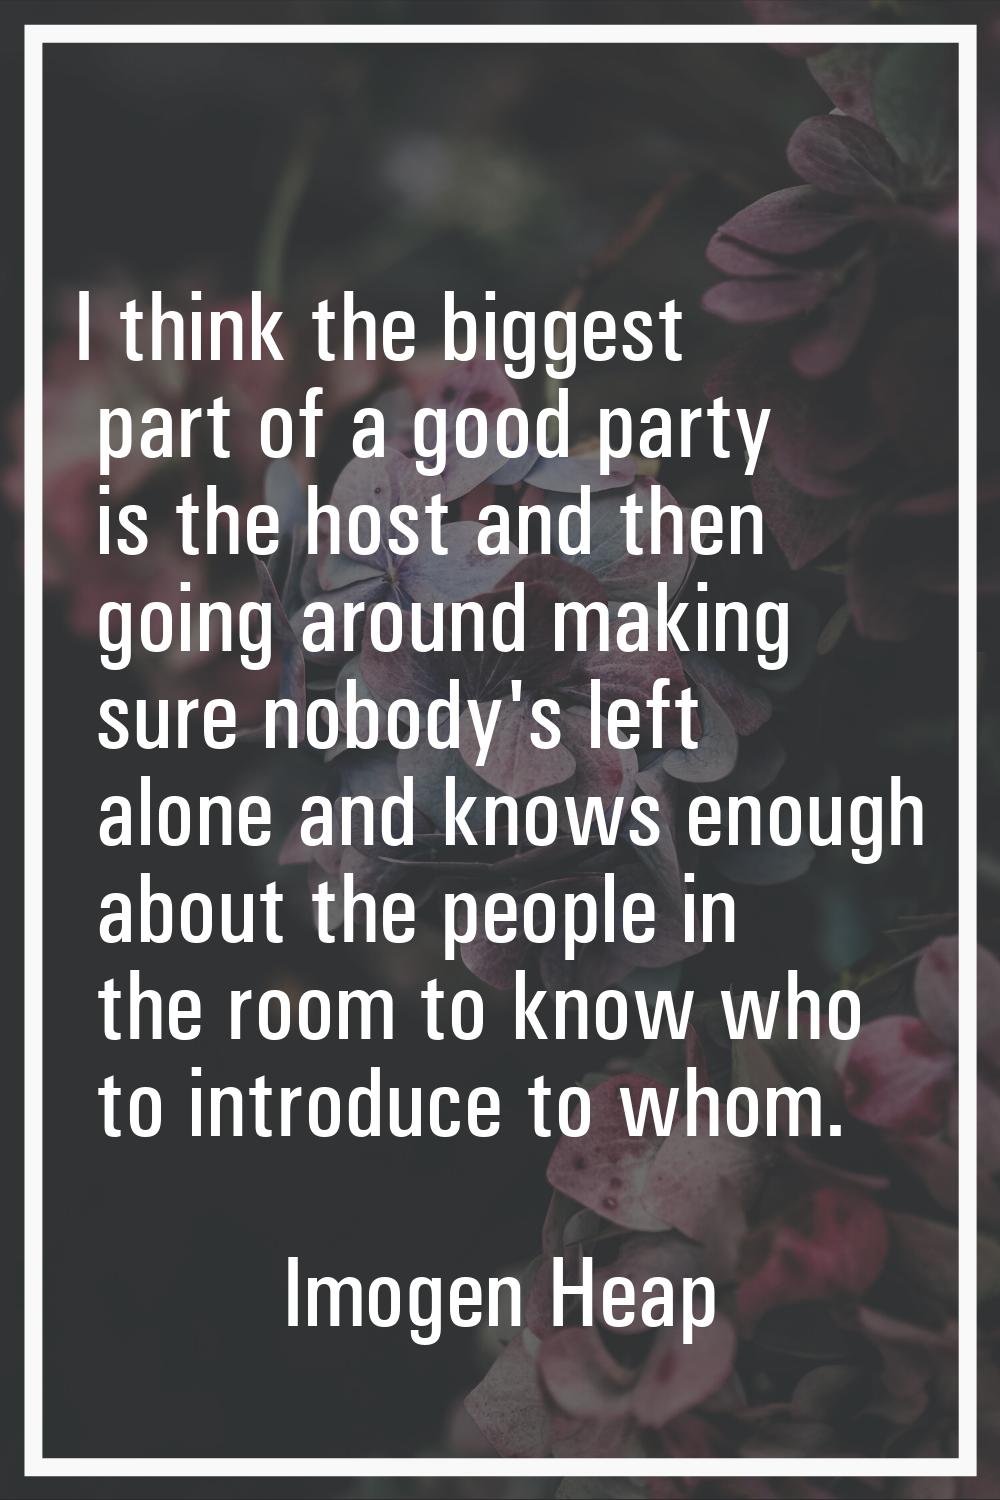 I think the biggest part of a good party is the host and then going around making sure nobody's lef